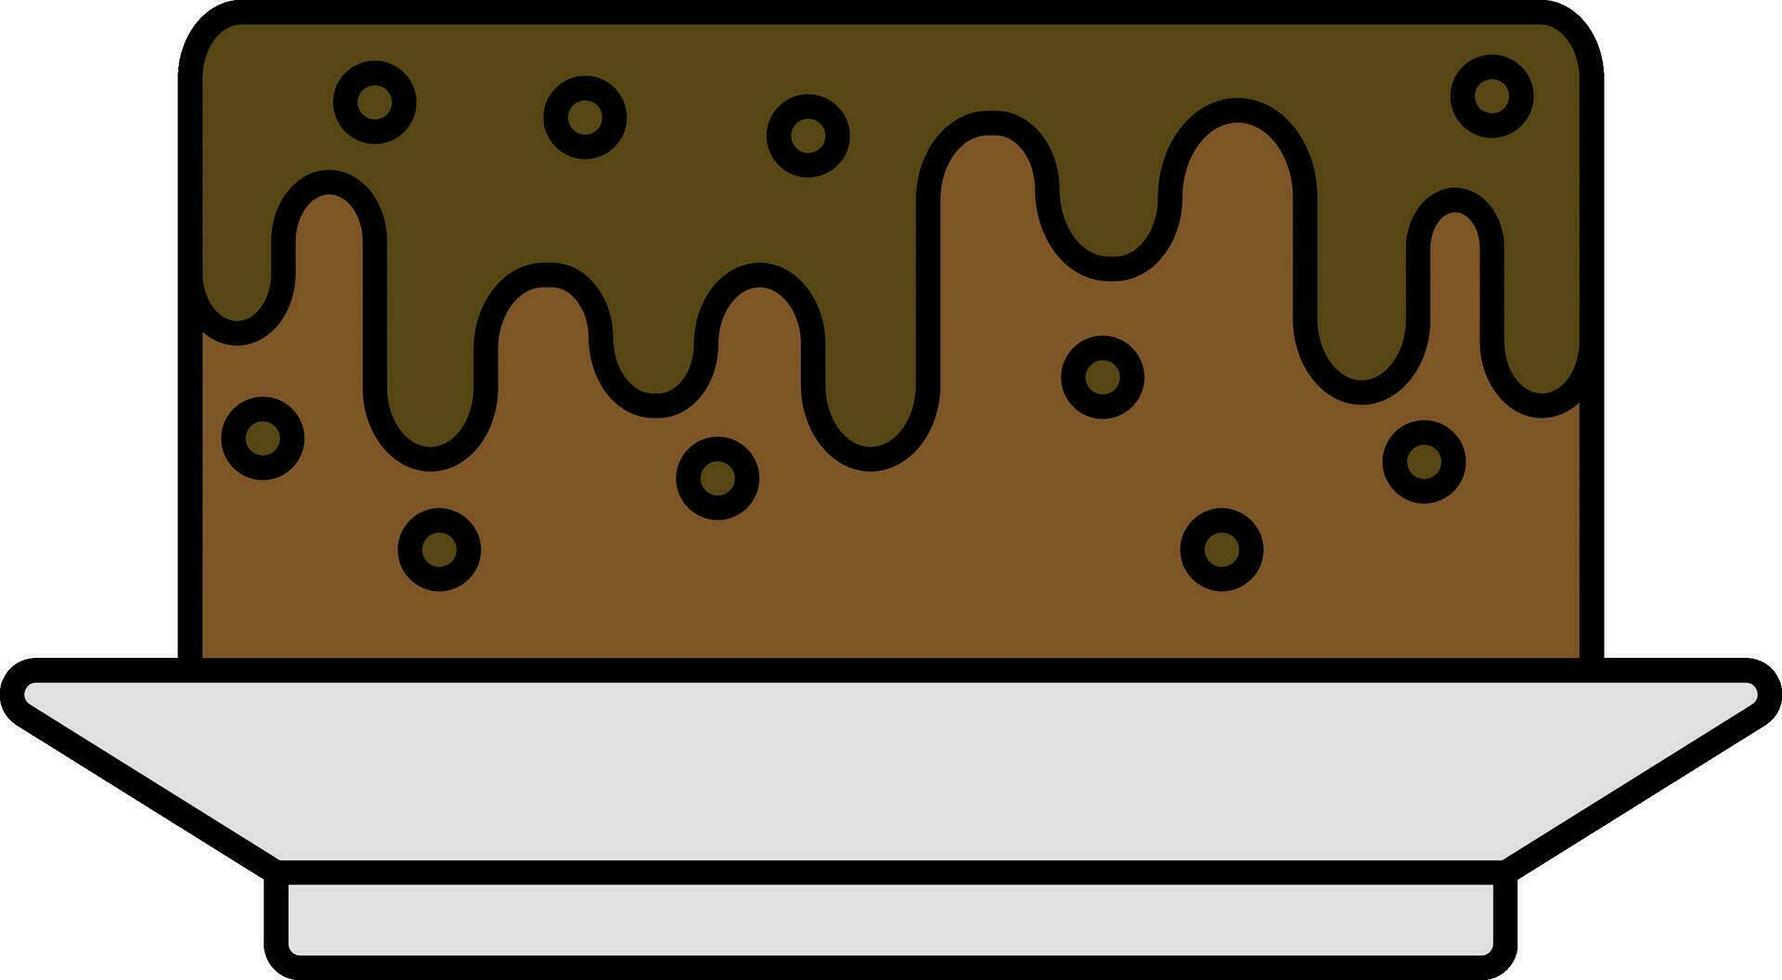 Chocolate Cake Or Pastry Plate Icon In Flat Style. vector